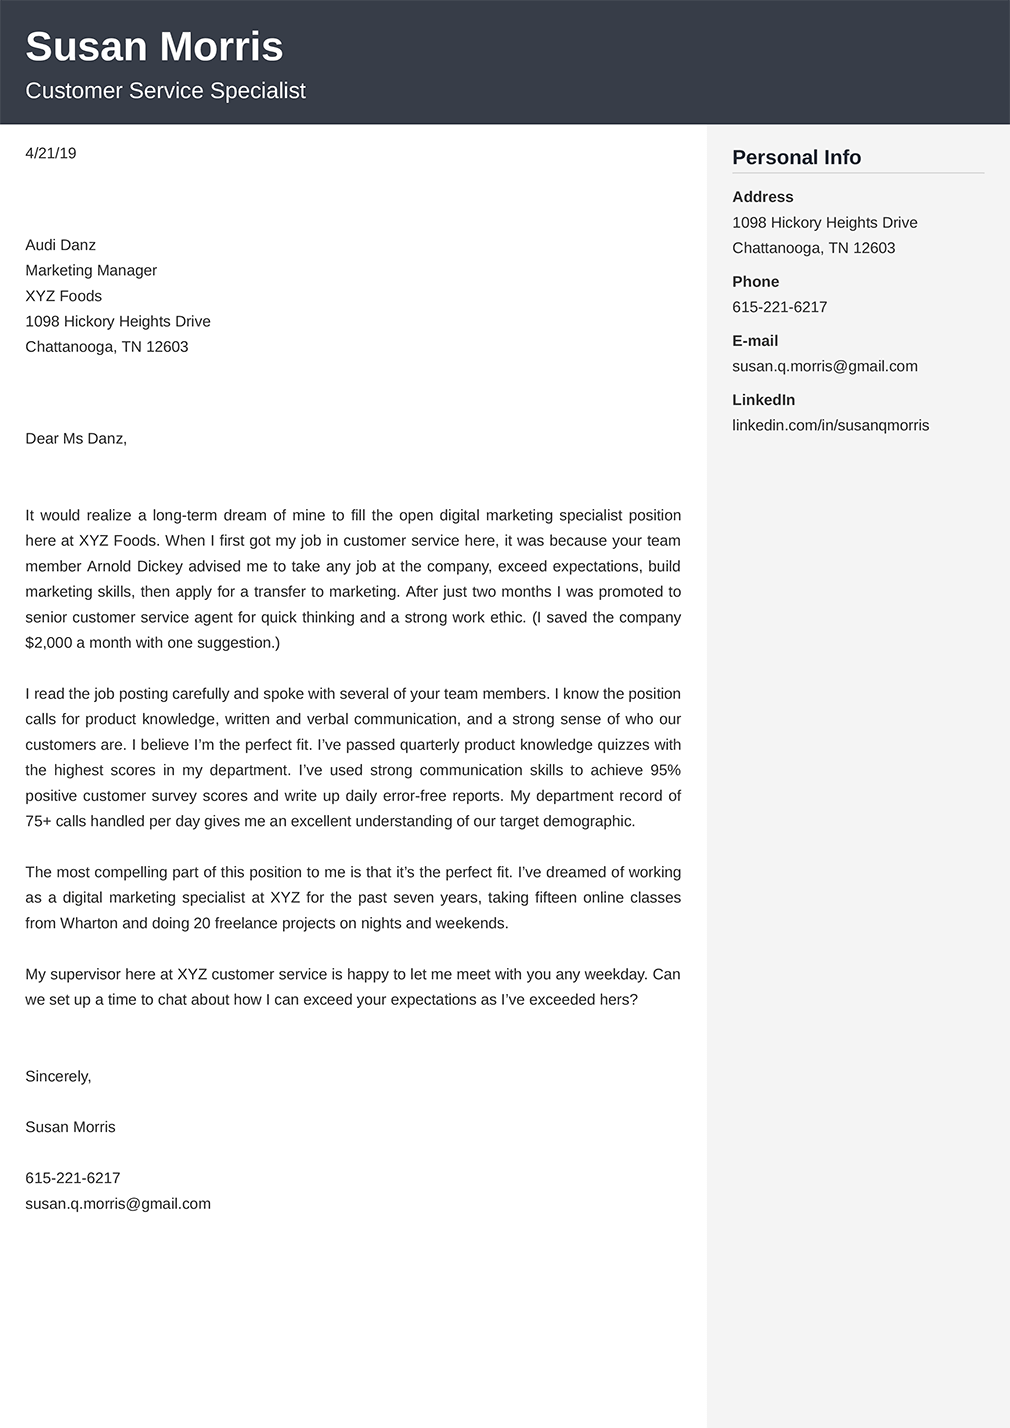 Sample Cover Letter Attorney from cdn-images.zety.com